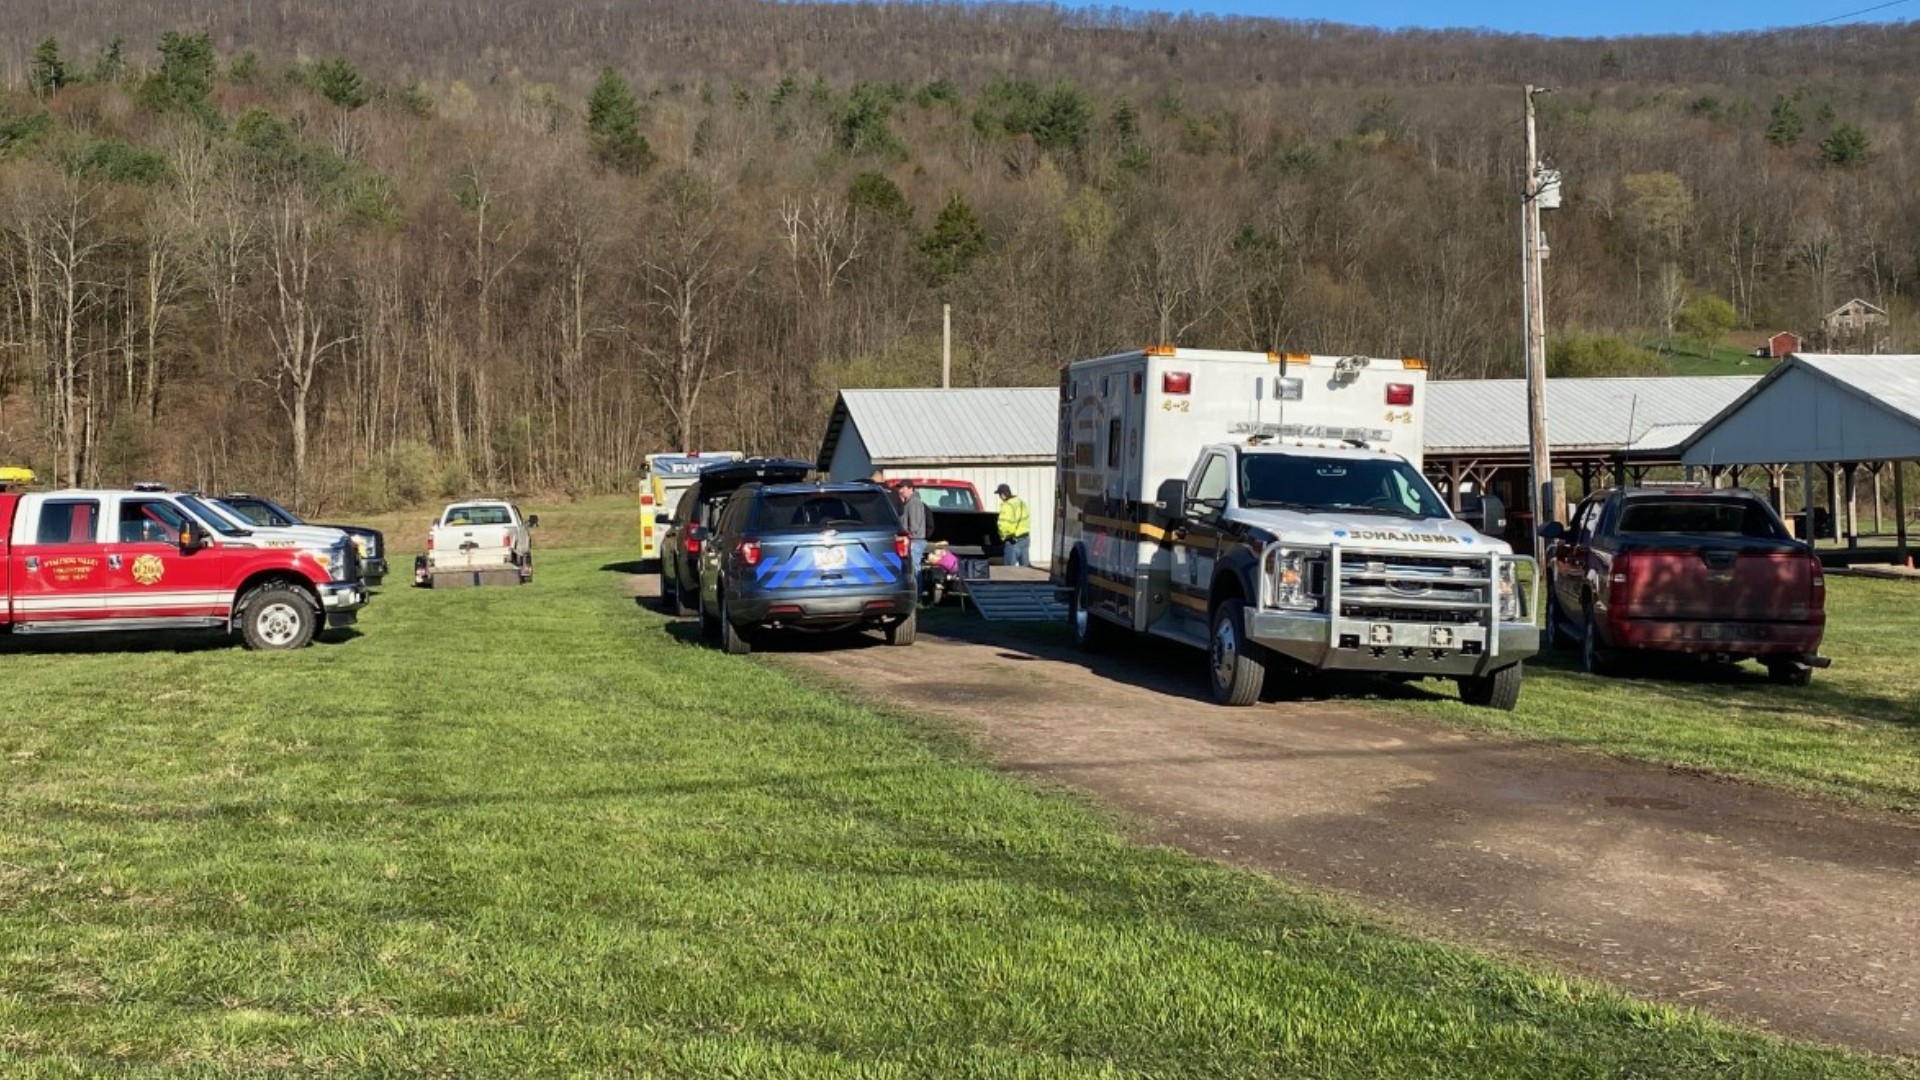 The search is on Friday morning for a downed helicopter in Wyoming County.